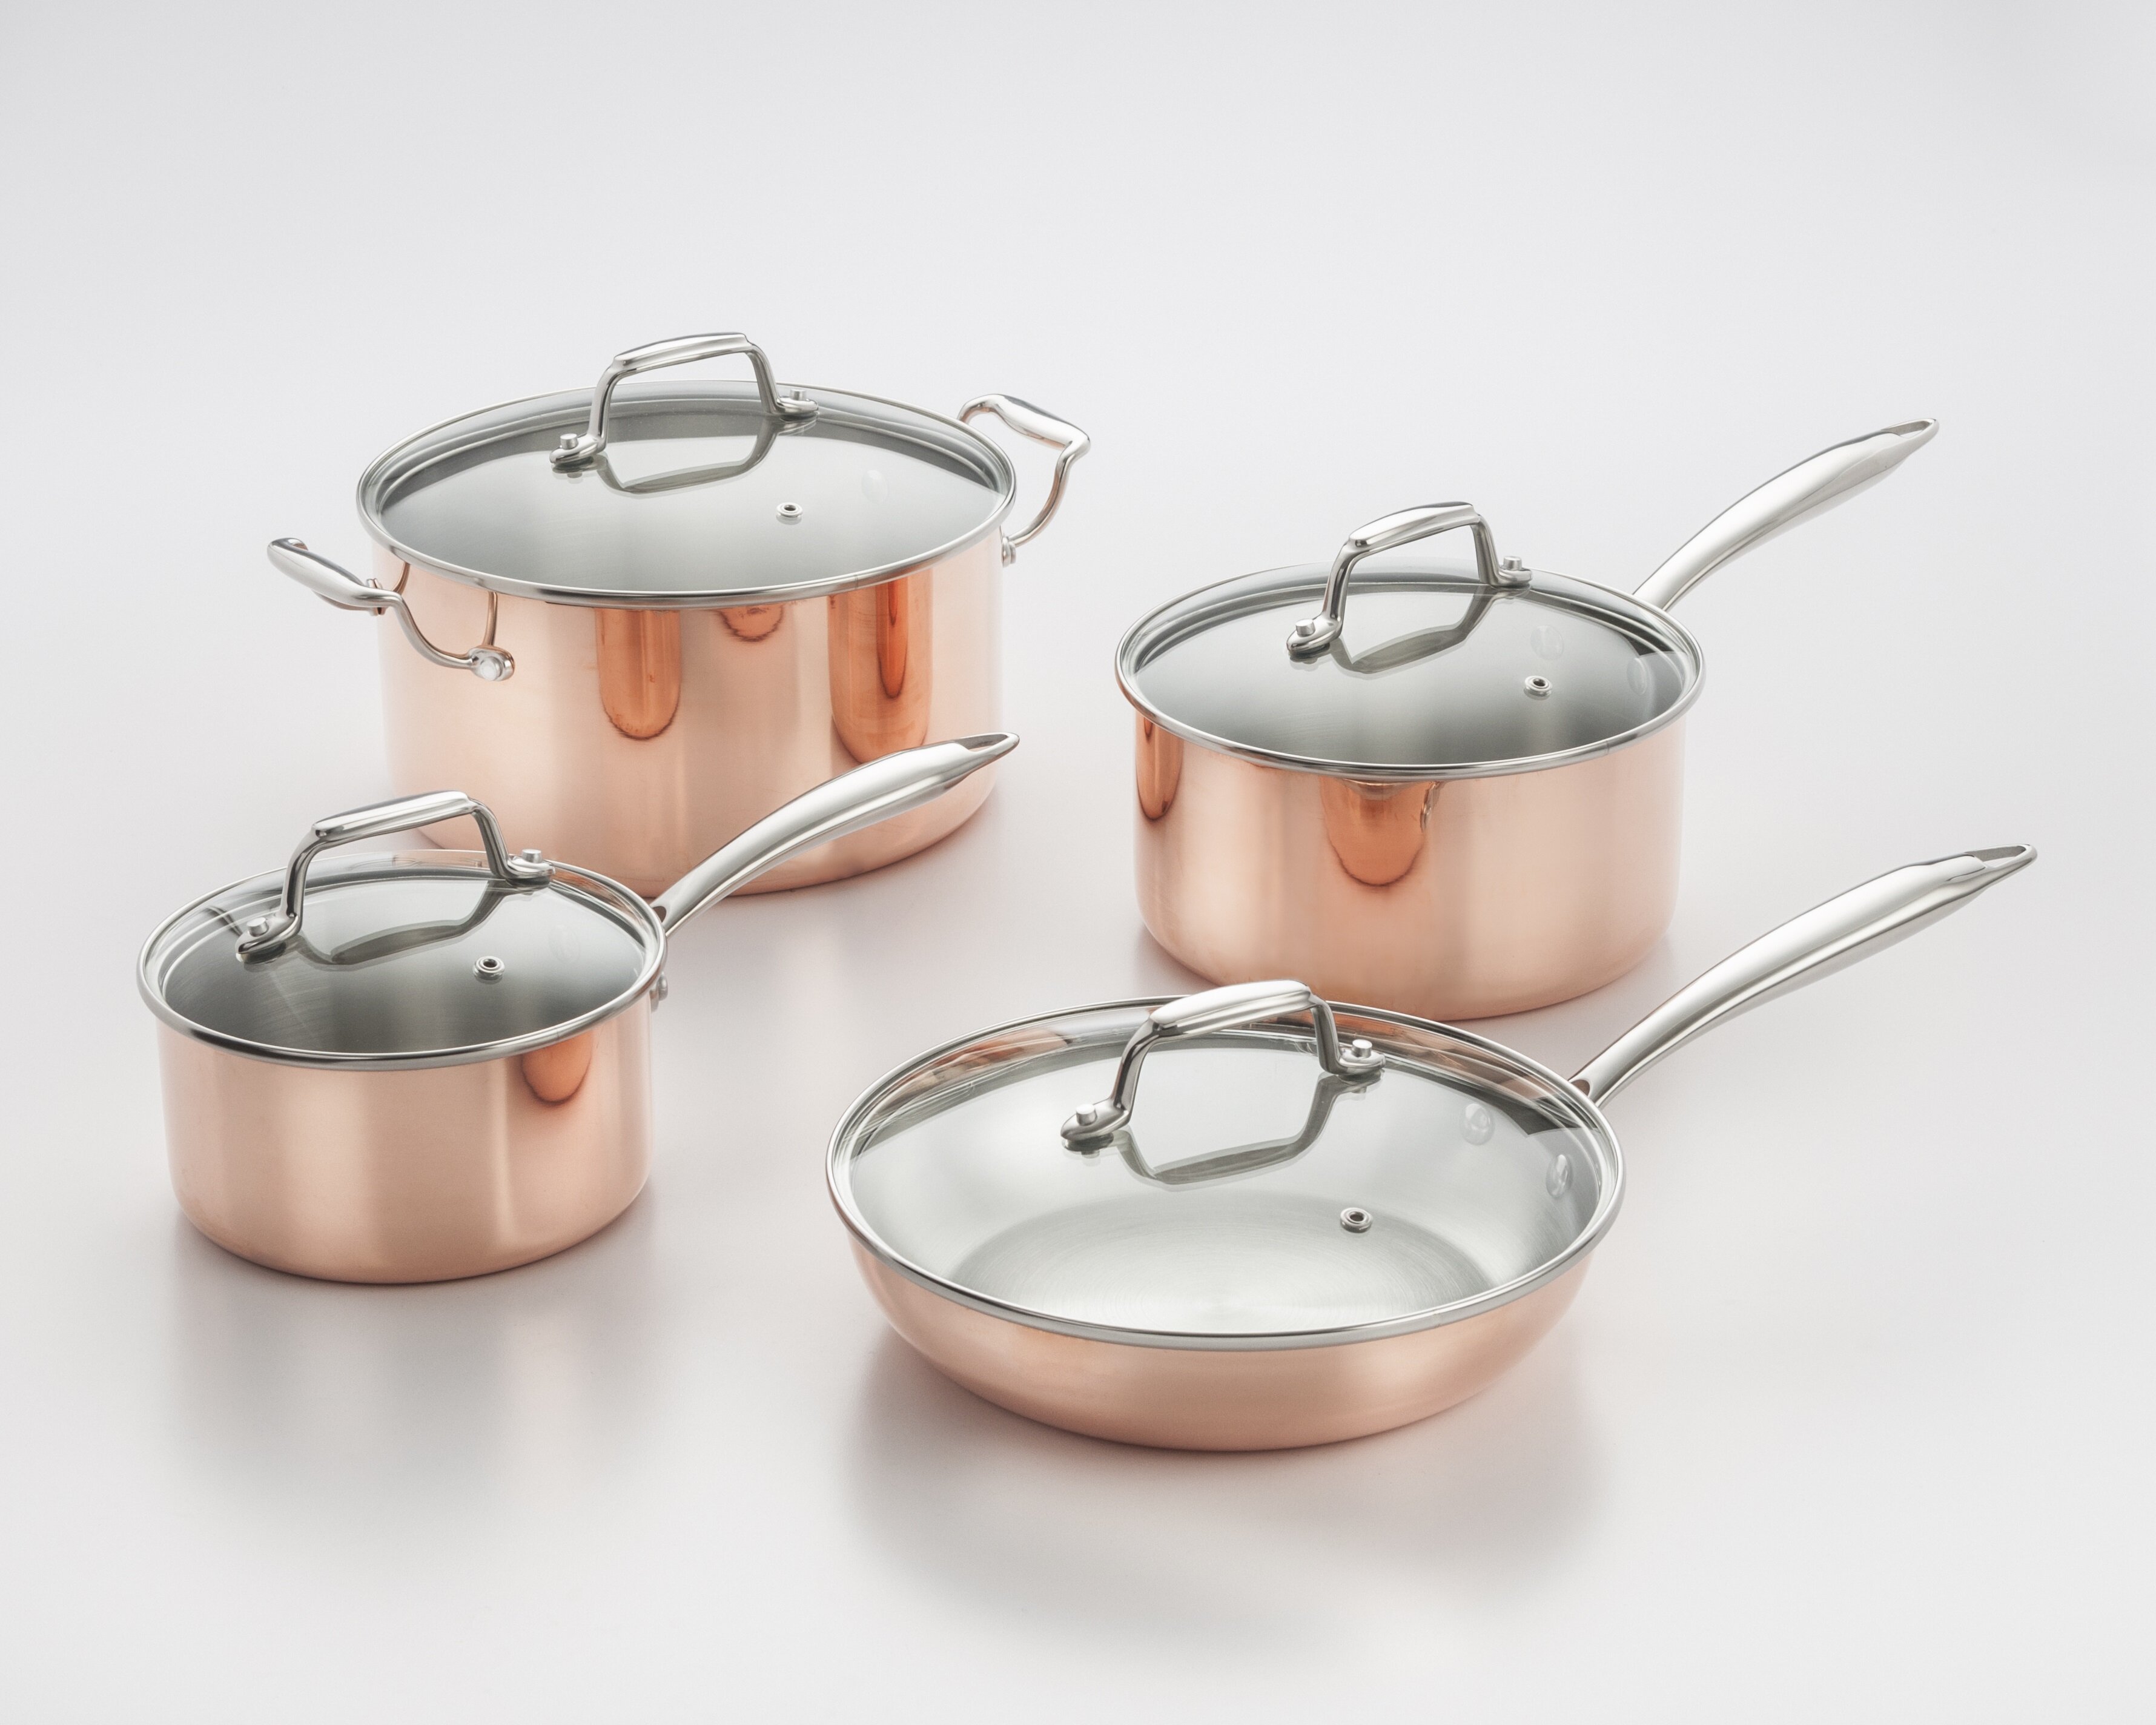 22CM S/S 3TIER STEAMER & PRESSED ALUMINIUM COPPER FRYING PAN SET COOKING KITCHEN 